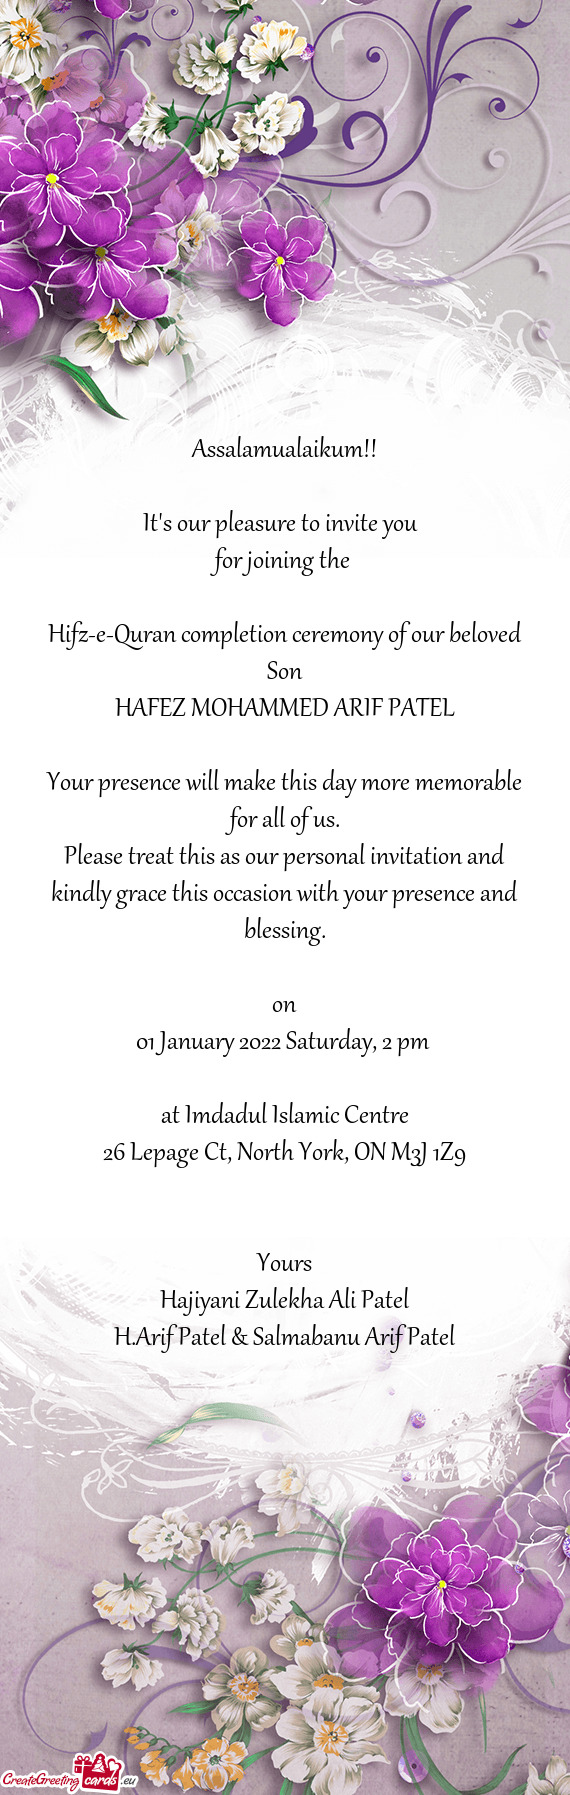 Hifz-e-Quran completion ceremony of our beloved Son